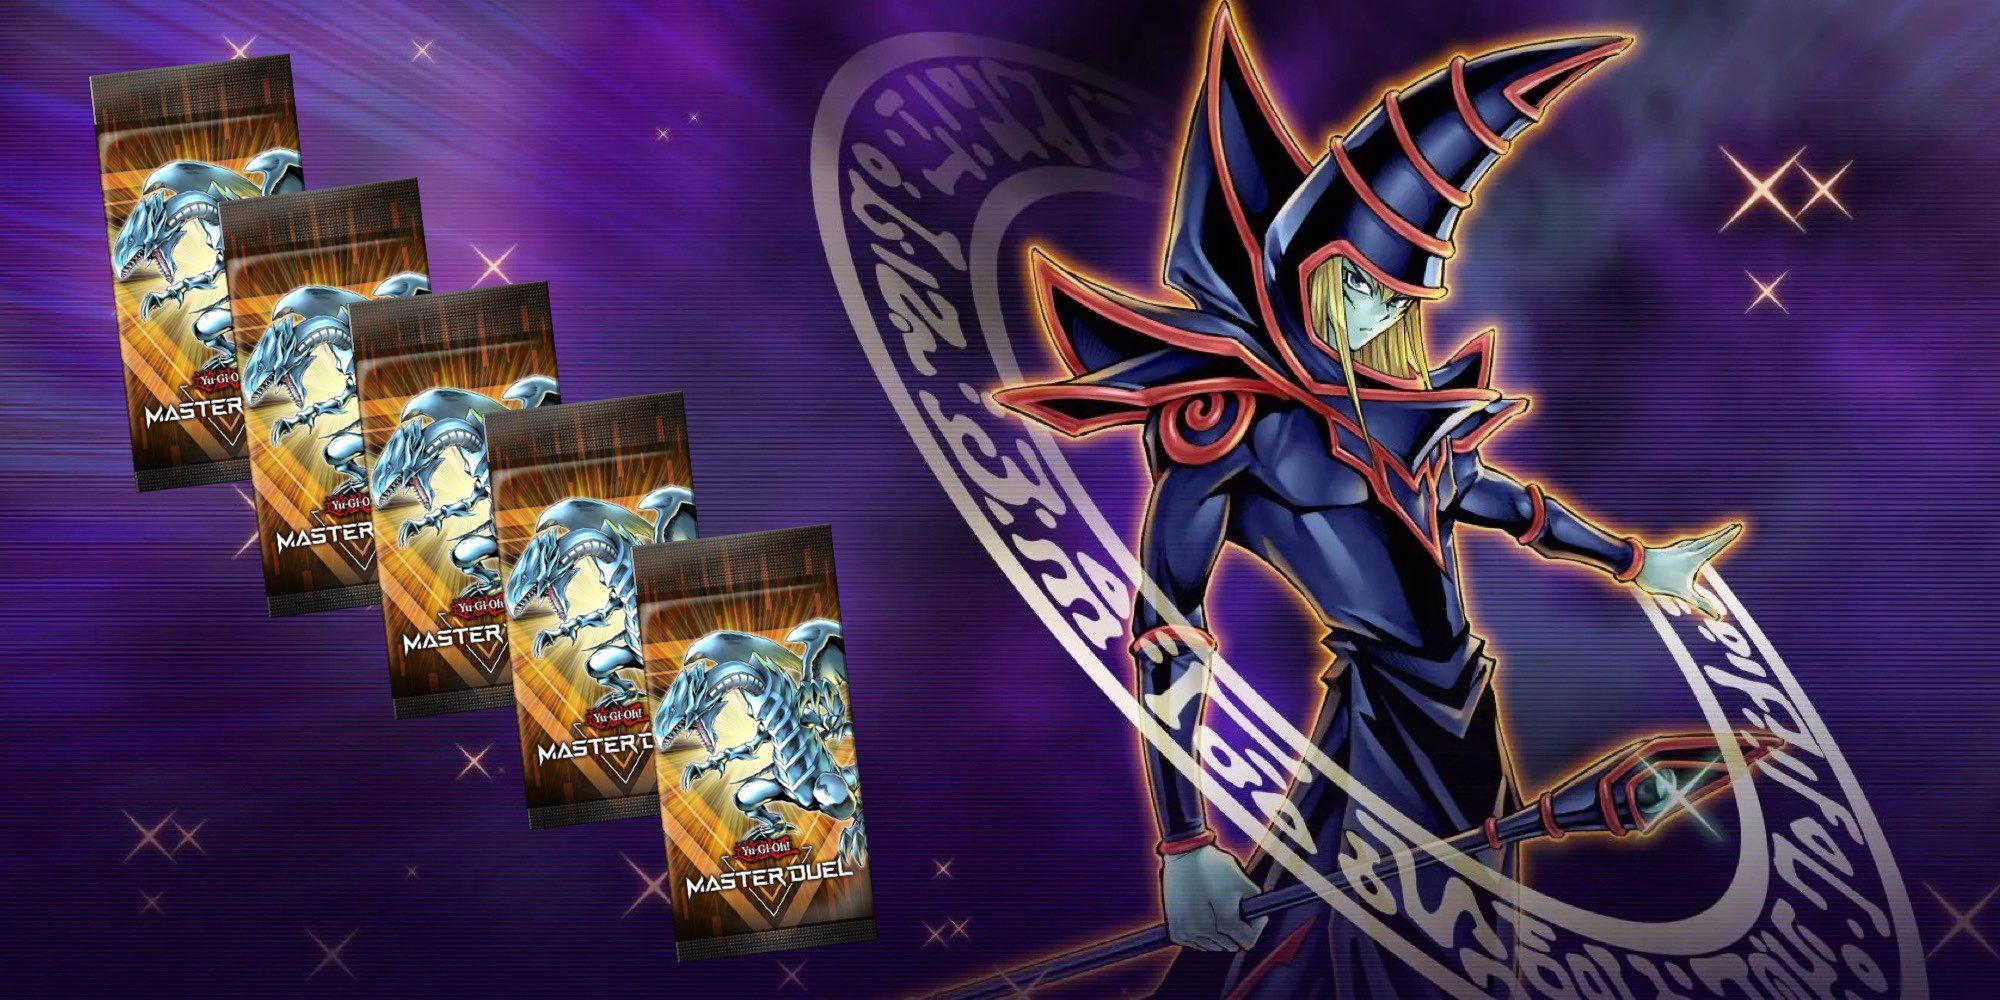 Yu-Gi-Oh! Dark Magician official artwork and Master Duel packs